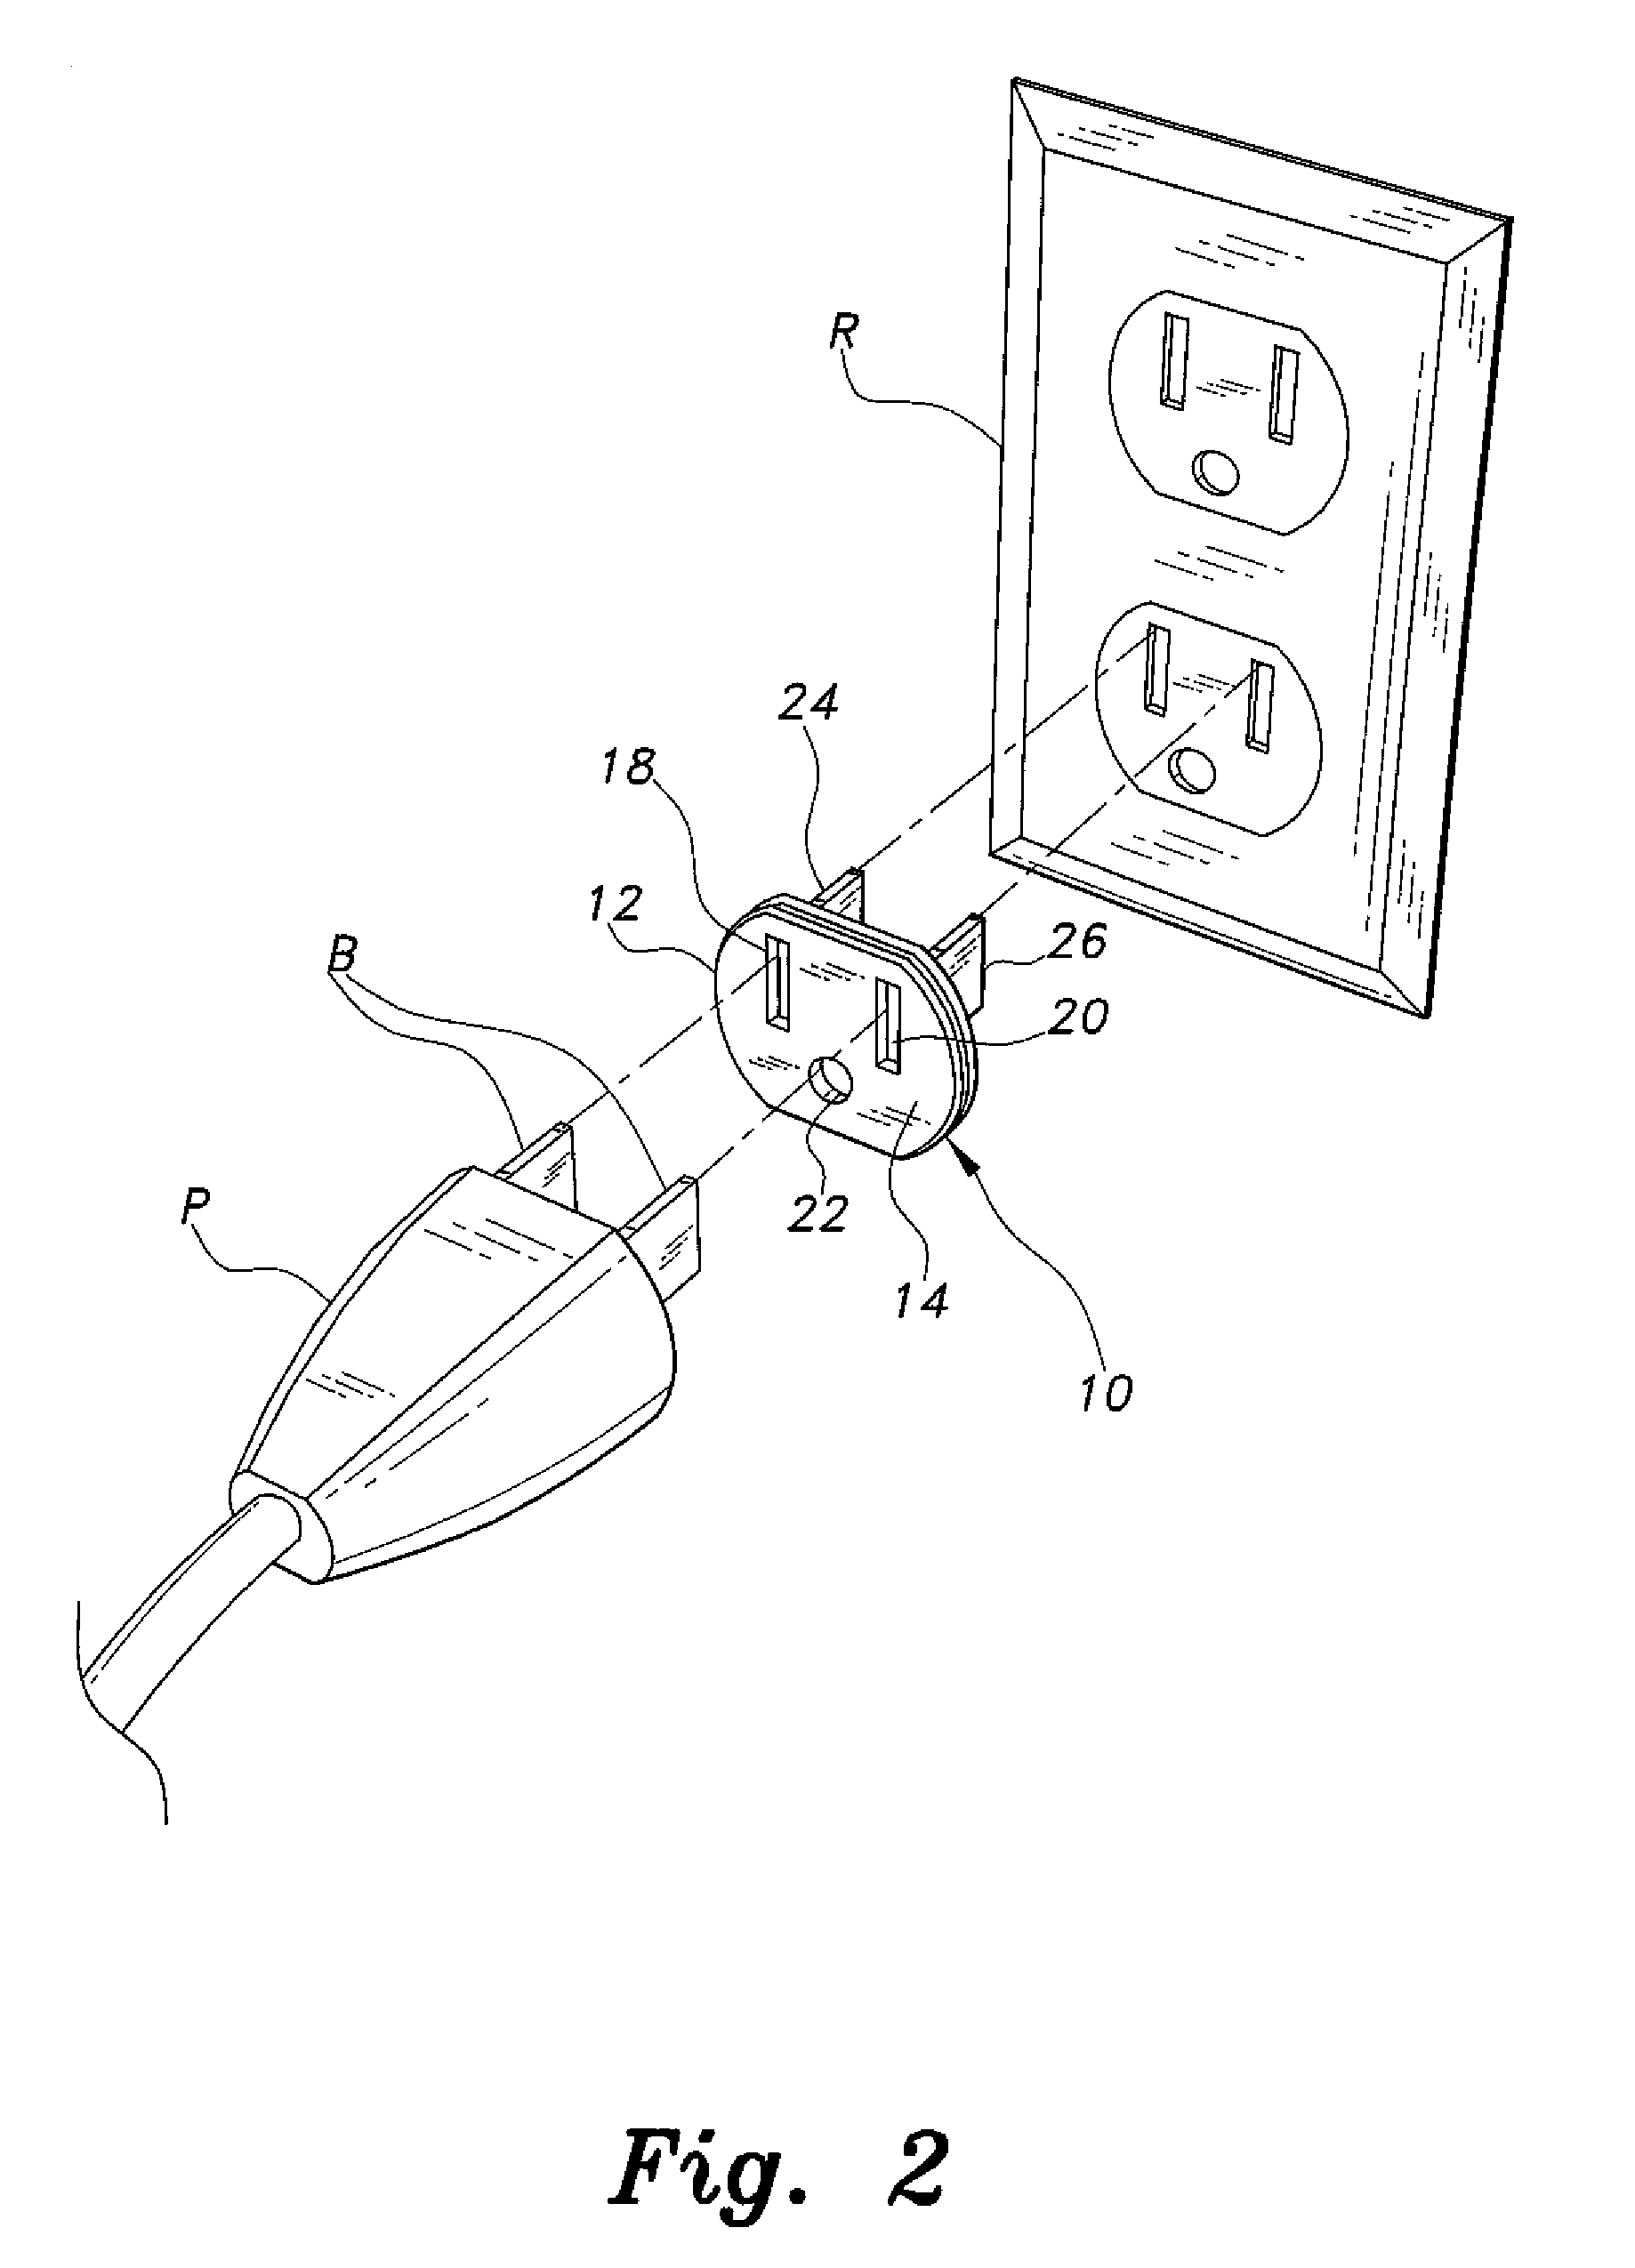 Electrical outlet safety device